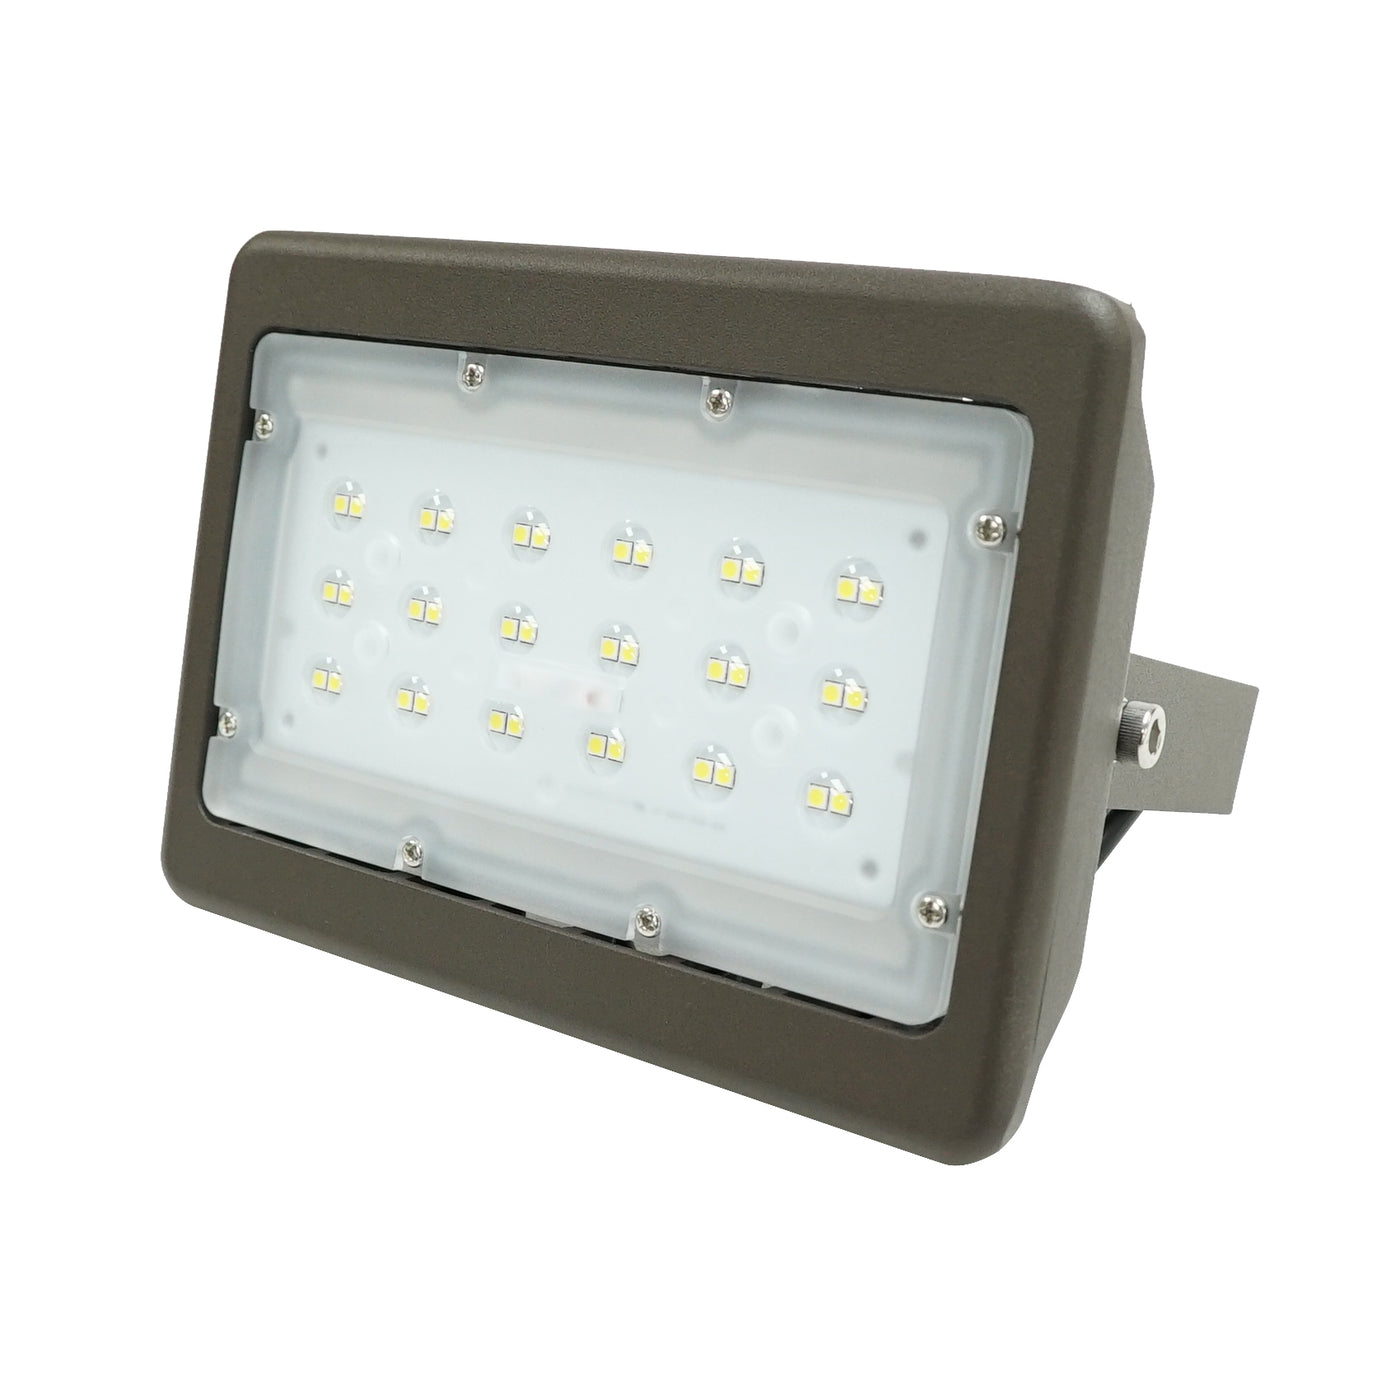 30W LED DLC High Output Security Flood Light, 4000LM - 5 Year Warranty - IP65 Rated